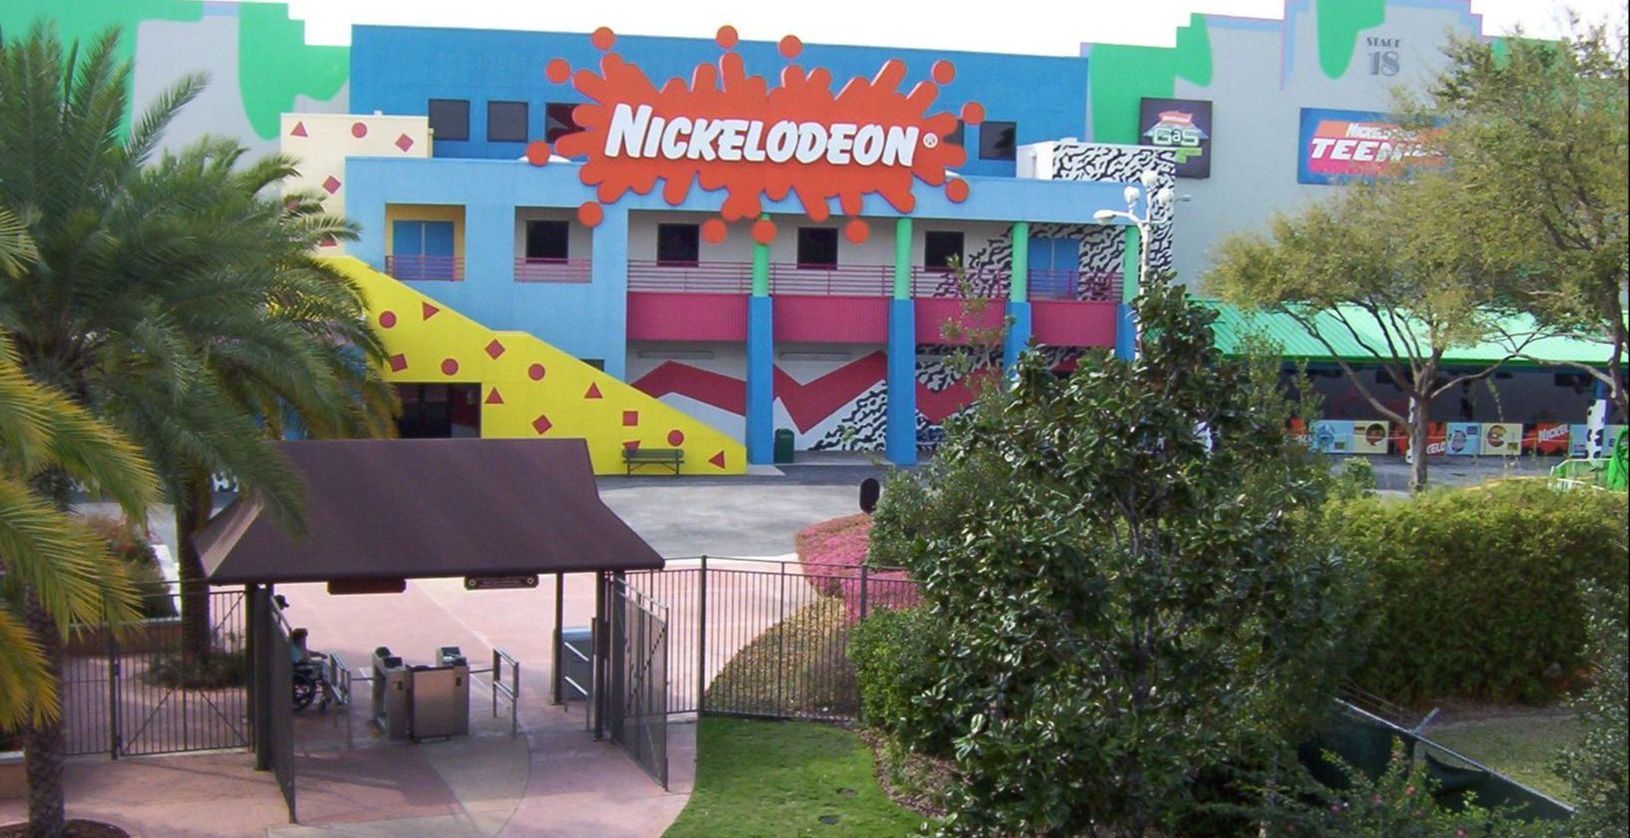 The First Trailer Of The Nickelodeon Documentary Is Here